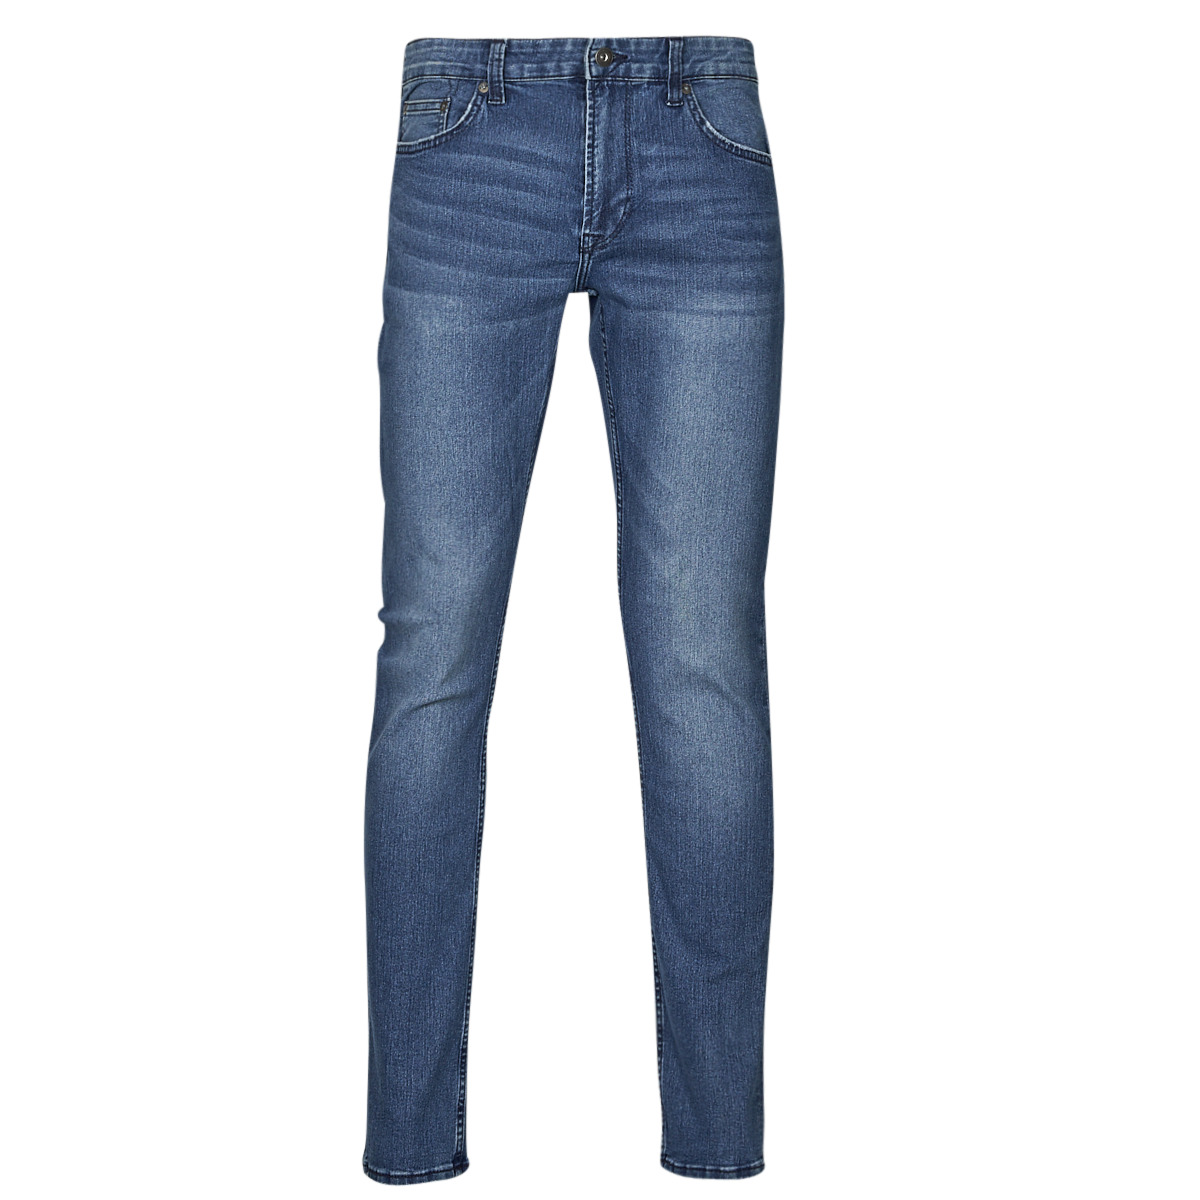 ONLY & SONS ONSLOOM MID. BLUE 4327 DNM JEANS VD Heren Jeans - Maat W31 X L32